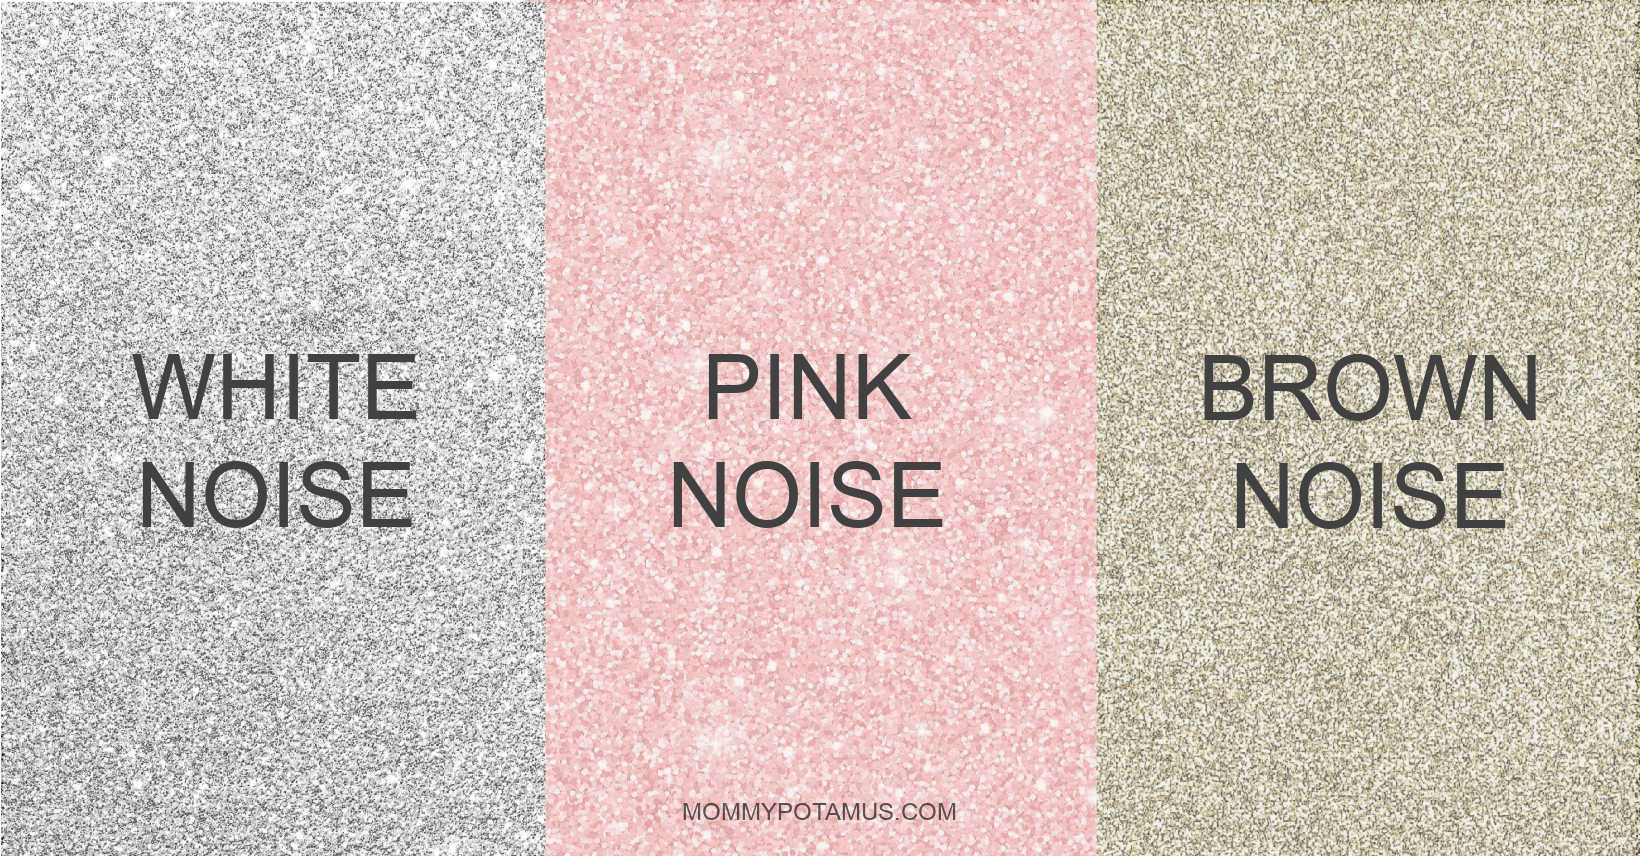 Visual representation of white, pink and brown noise